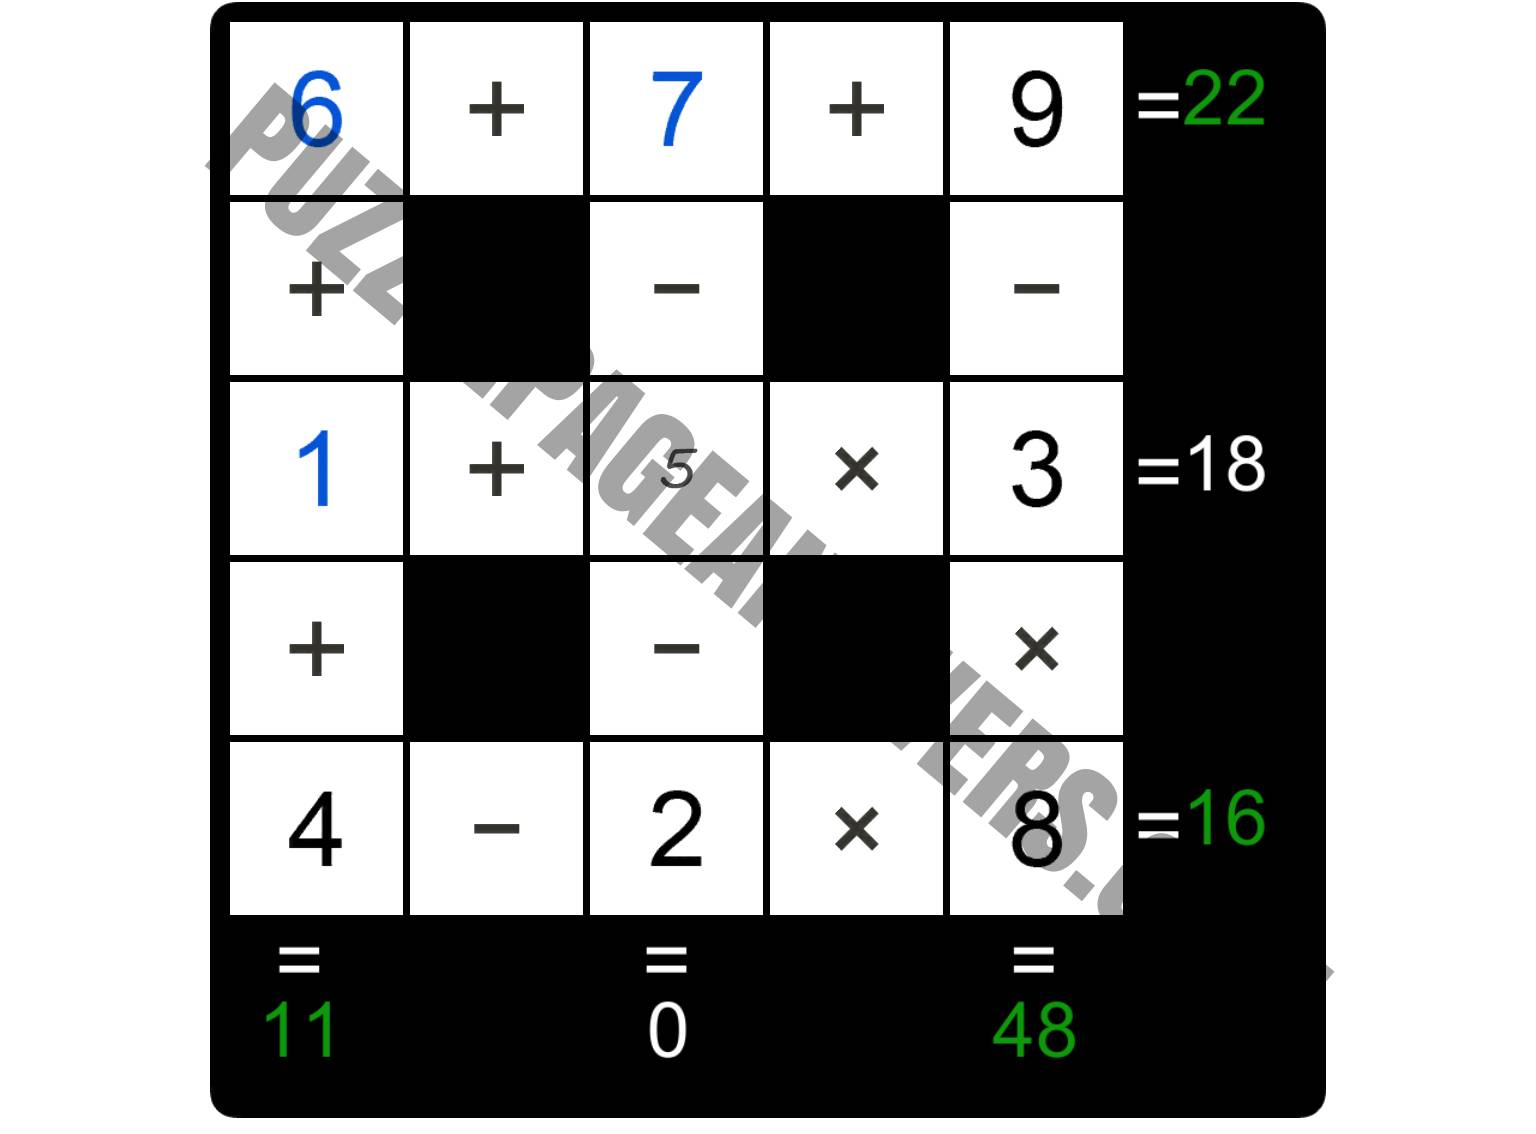 Puzzle Page Cross Sum May 4 2022 Answers PuzzlePageAnswers com